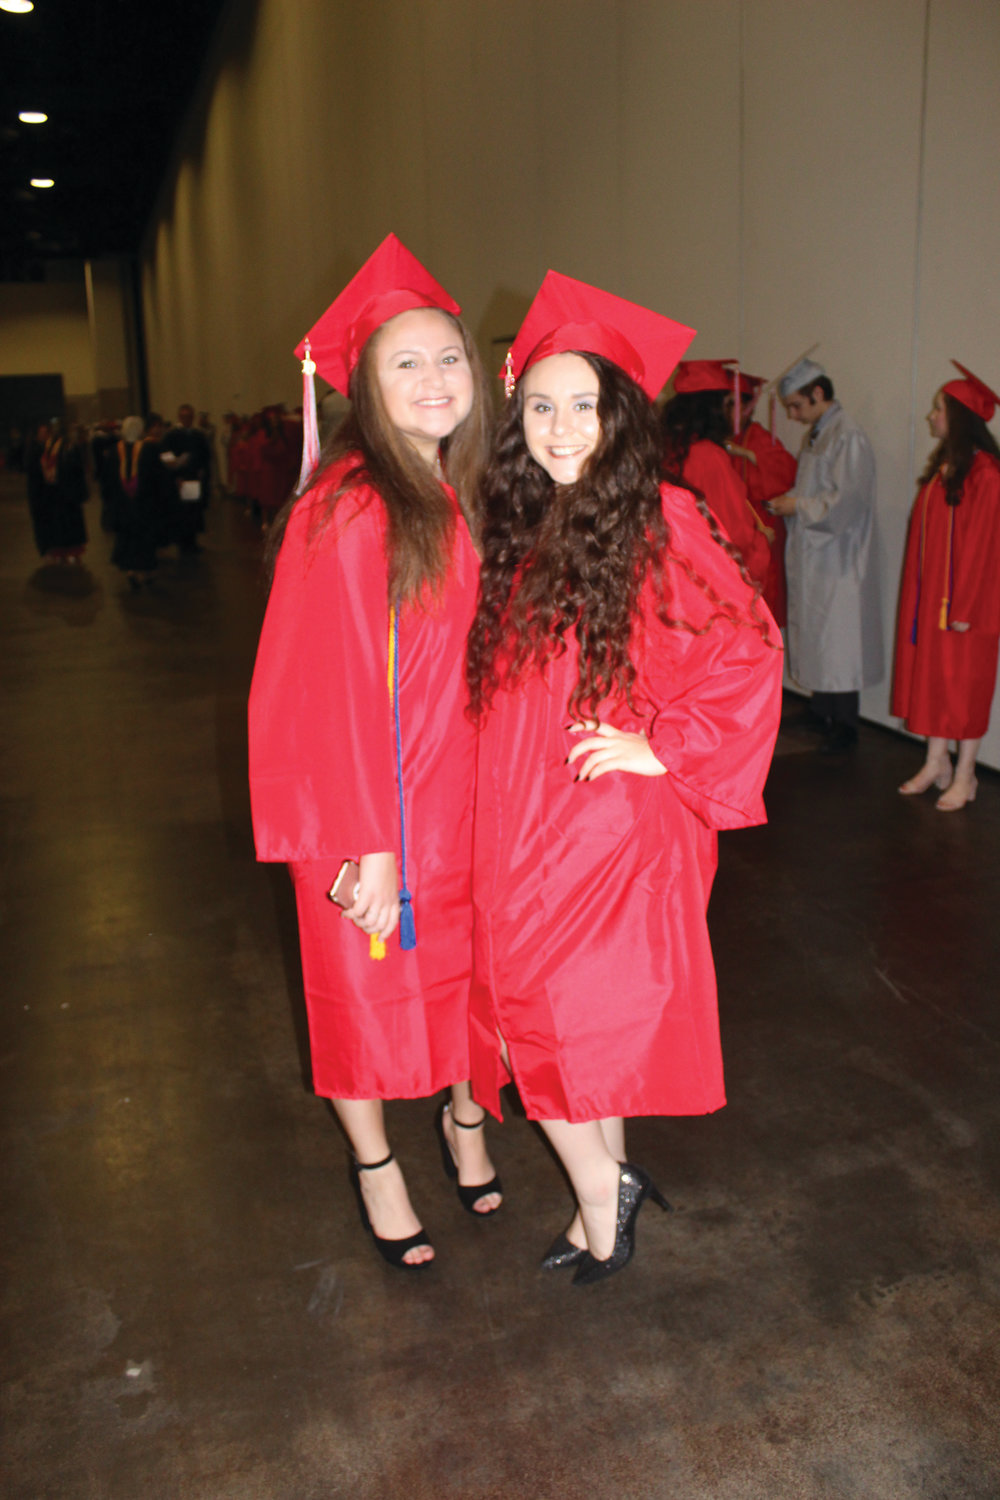 EXCITED FOR THE DAY: Seniors Emma Rosenfield and Emily Petrarca prepare for the procession into Saturday’s Cranston West graduation.